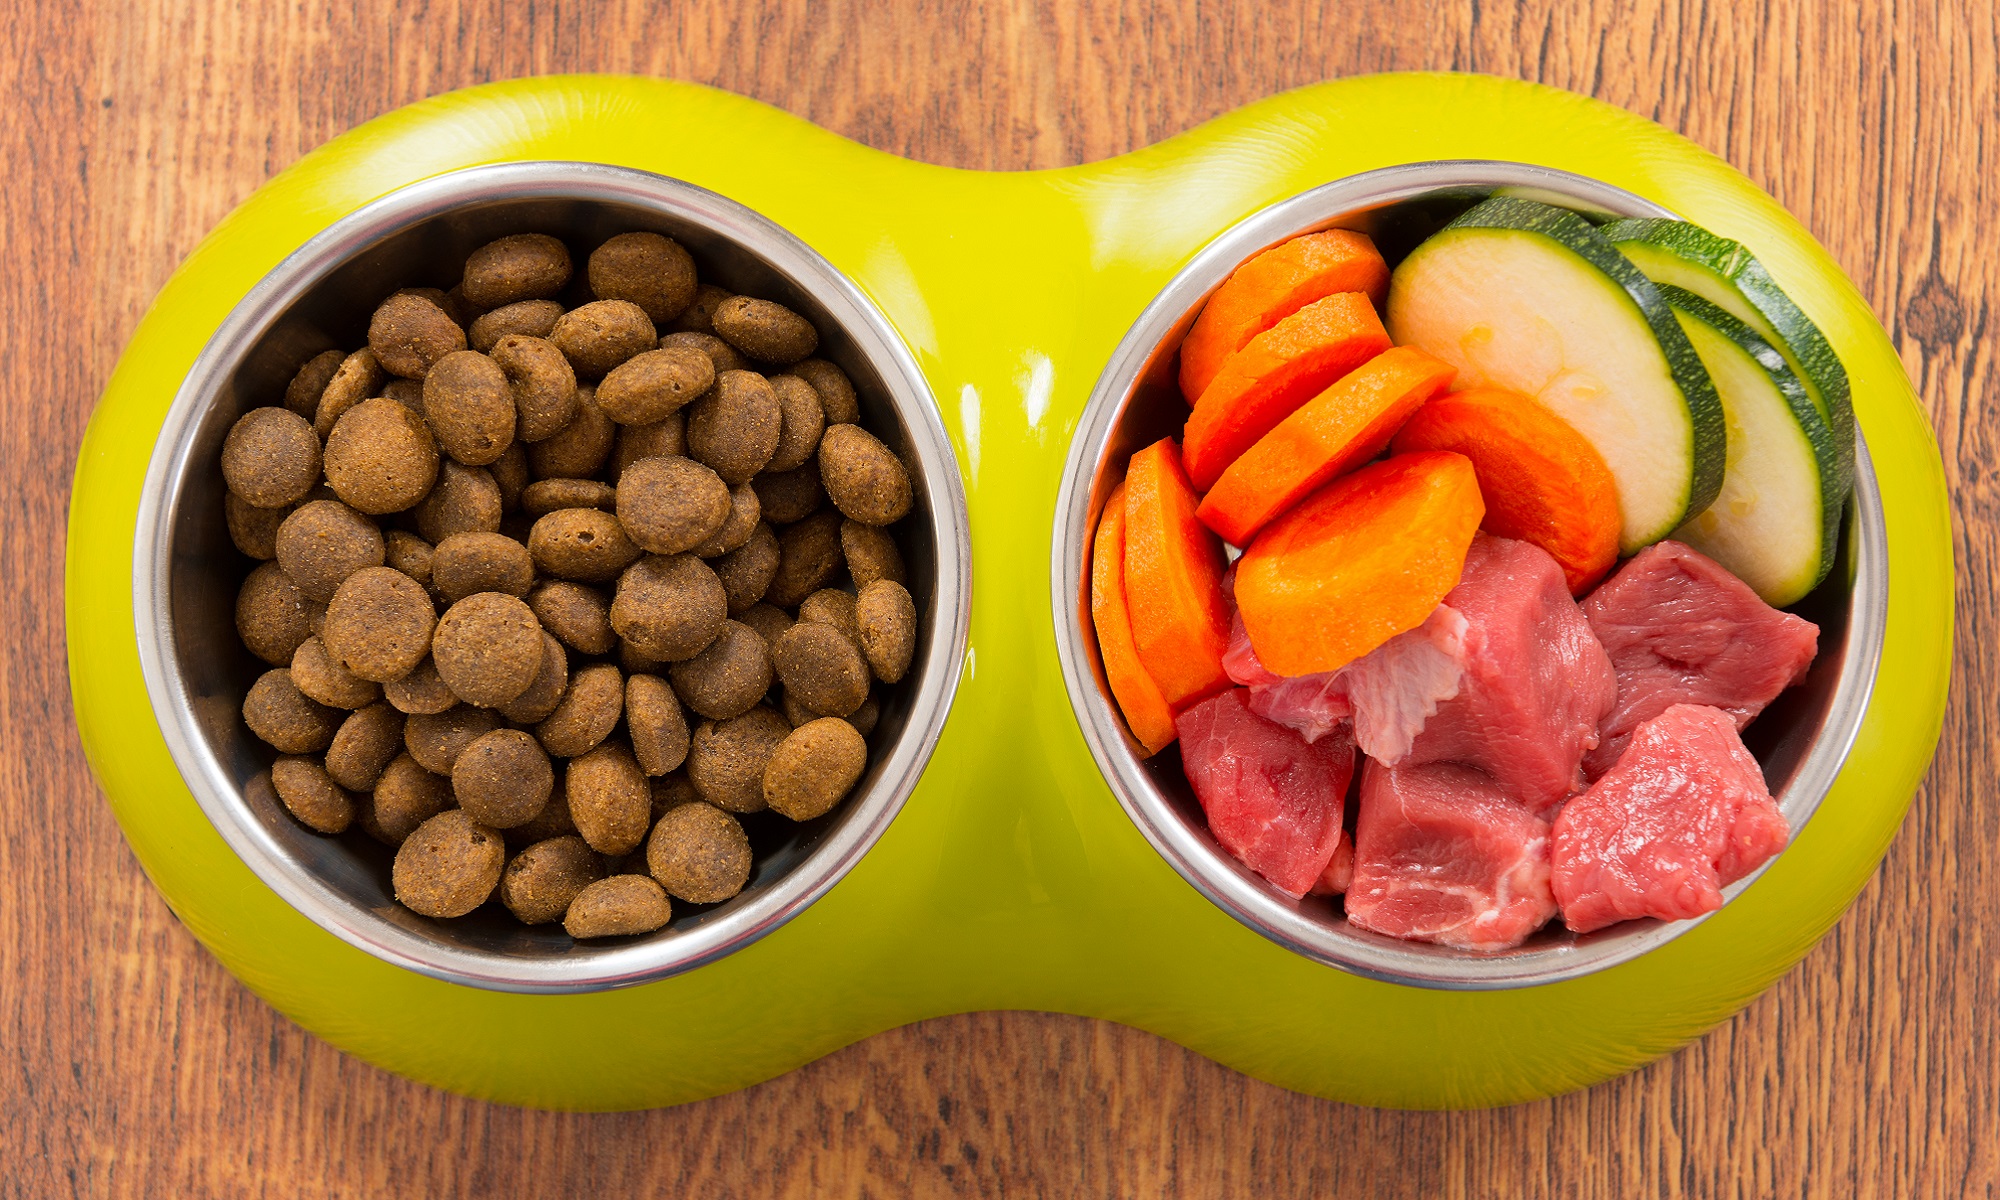 From Vets – Replace at Least Some Kibble With Fresh Foods